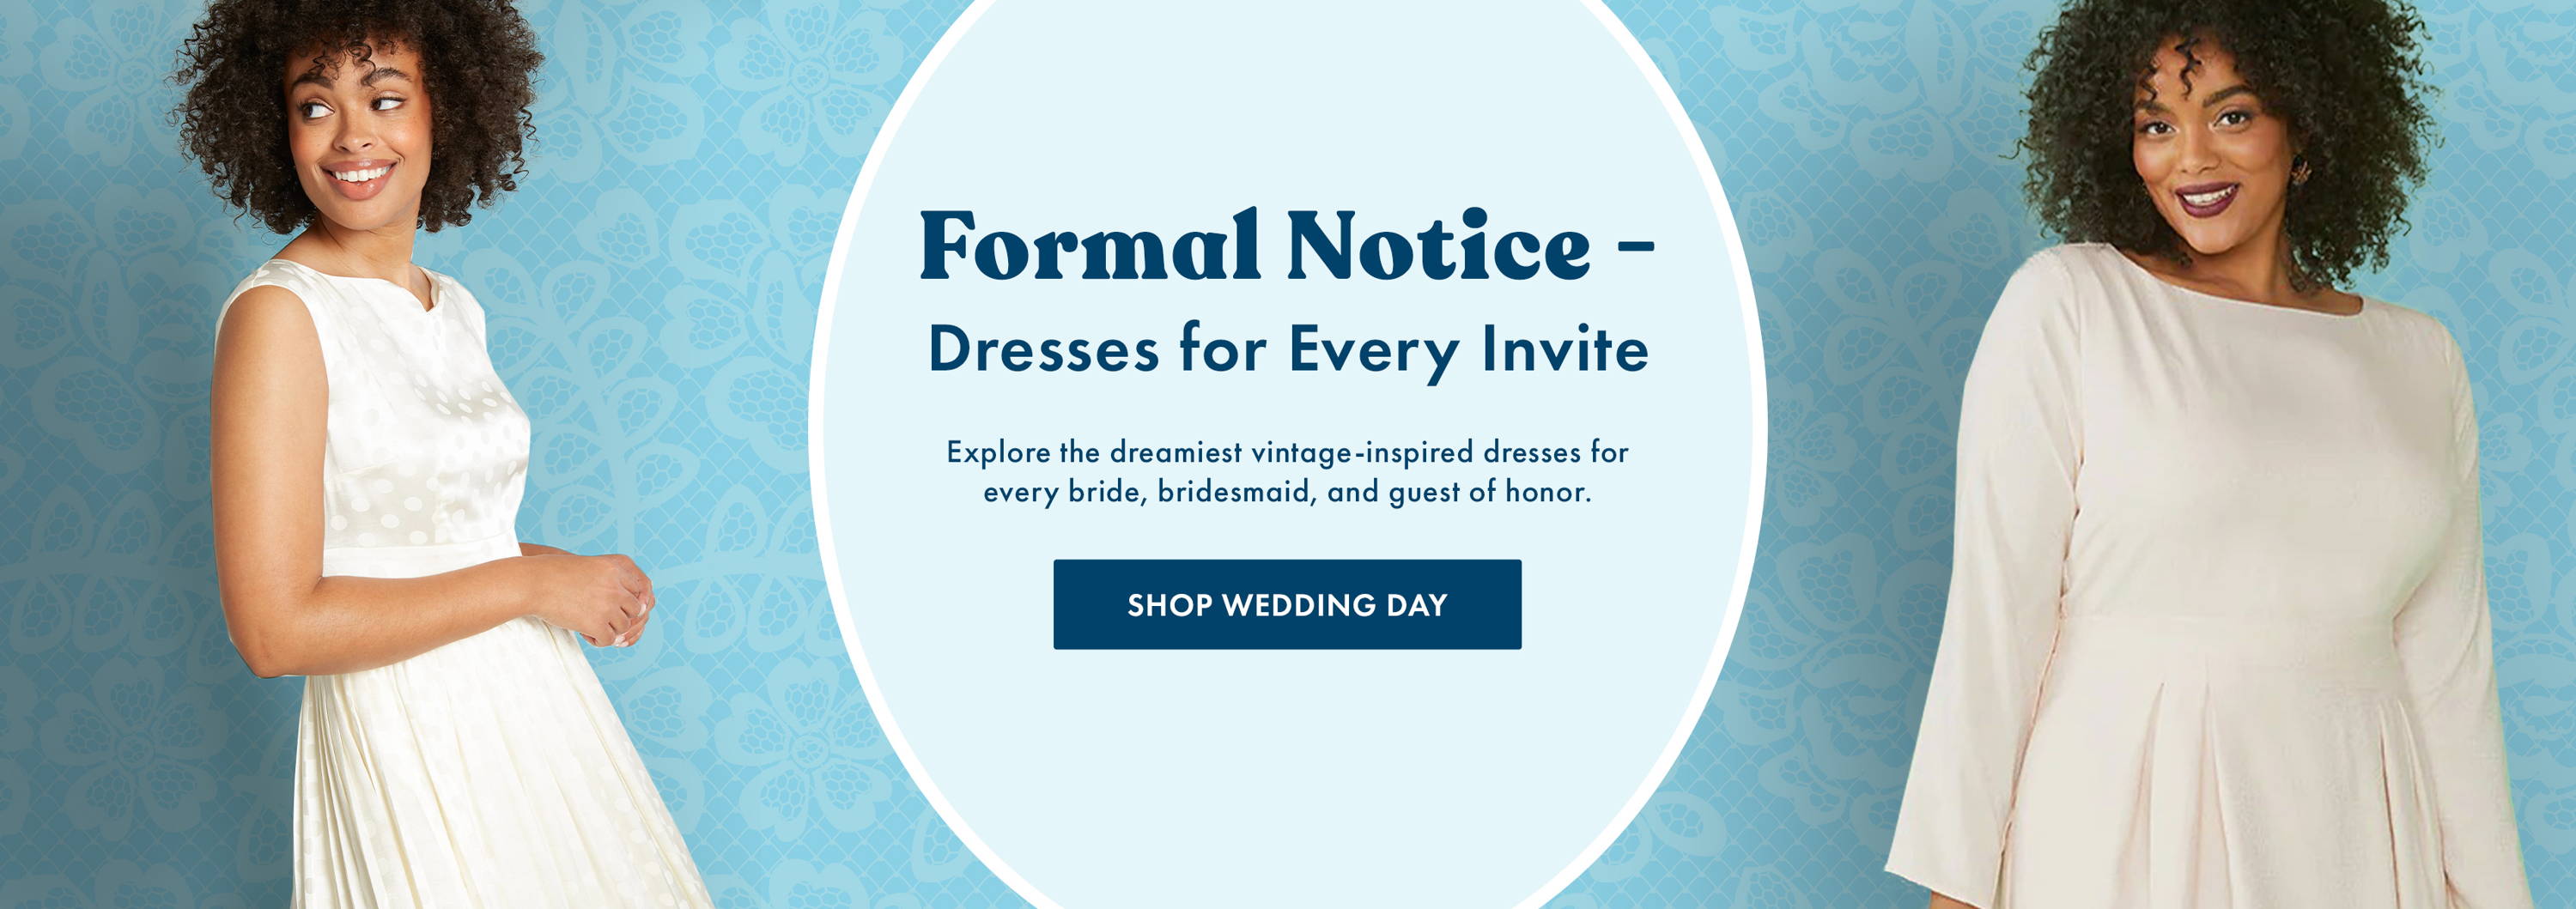 Formal Notice - Dresses for Every Invite. Shop Wedding Day